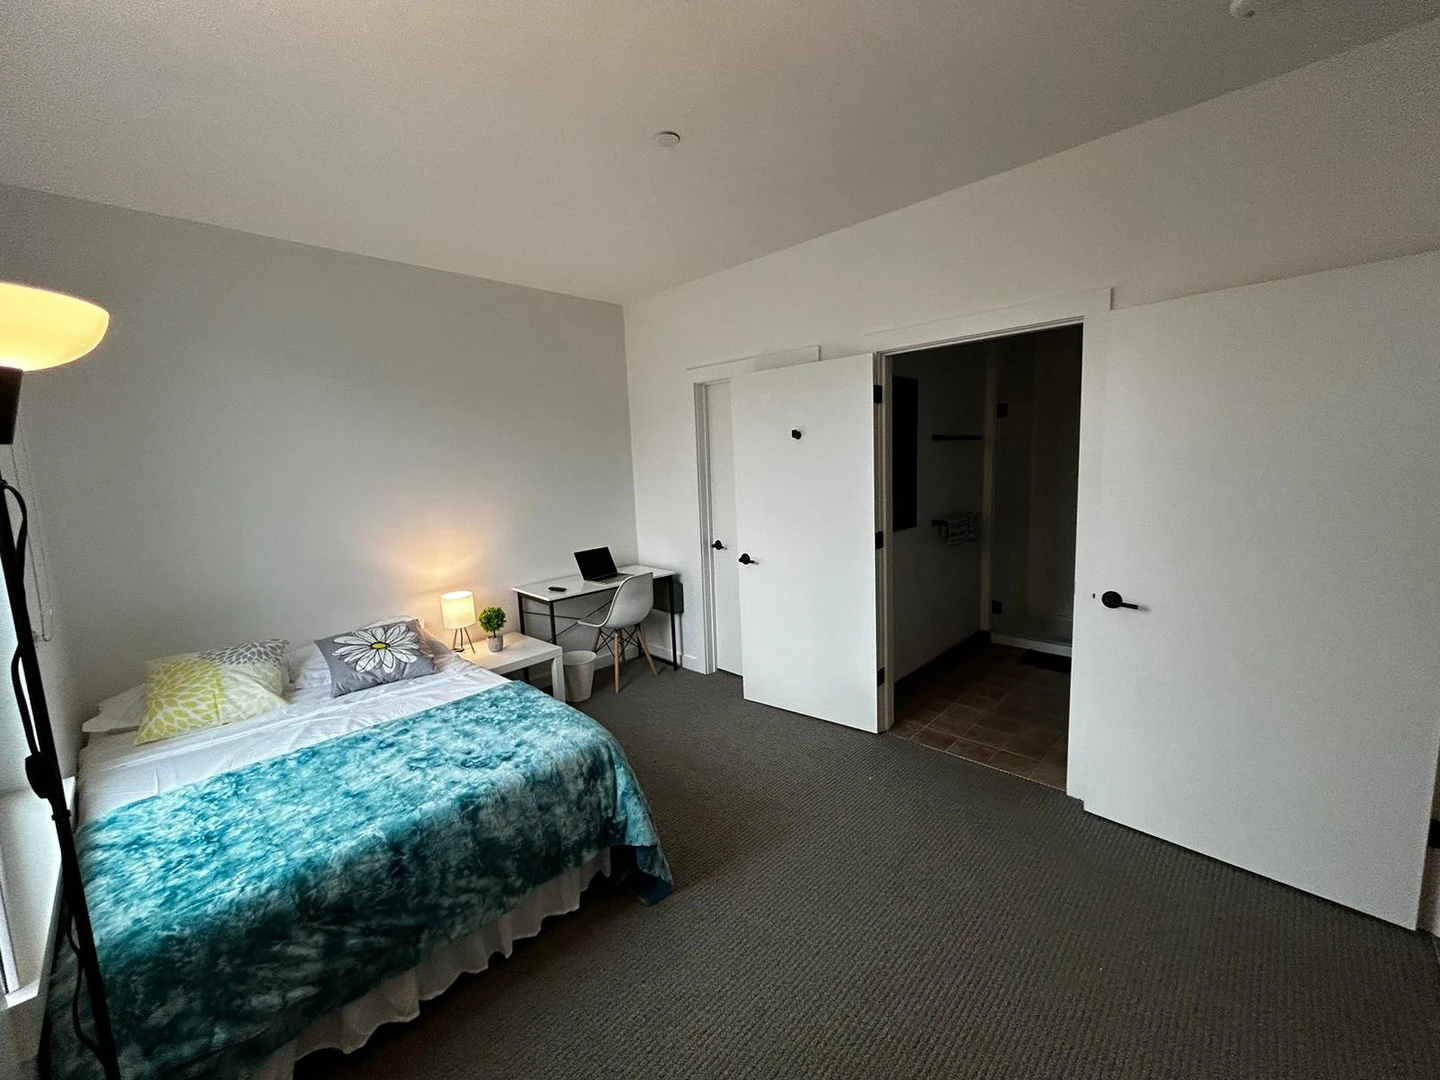 Room for rent in a shared flat in Boston